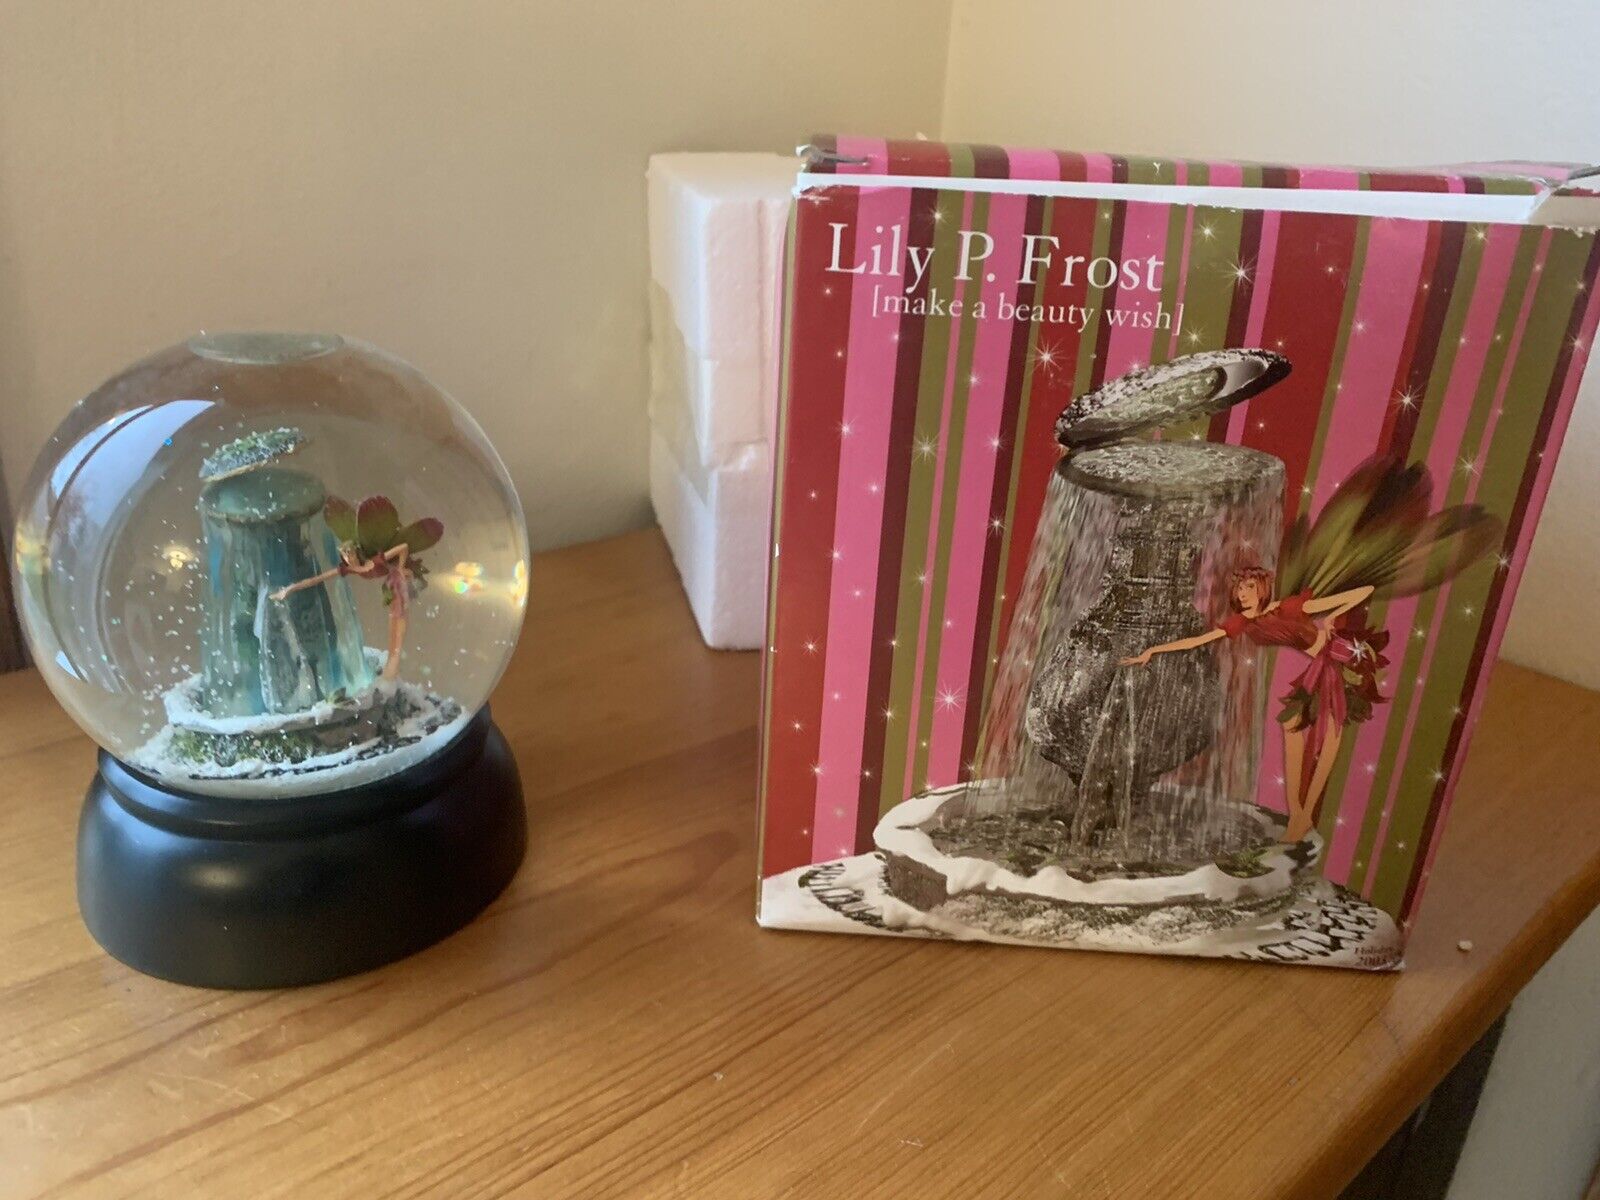 Nordstrom Lily P. Frost Make a Beauty Wish Snow Globe Retired 2003 Rare in Box